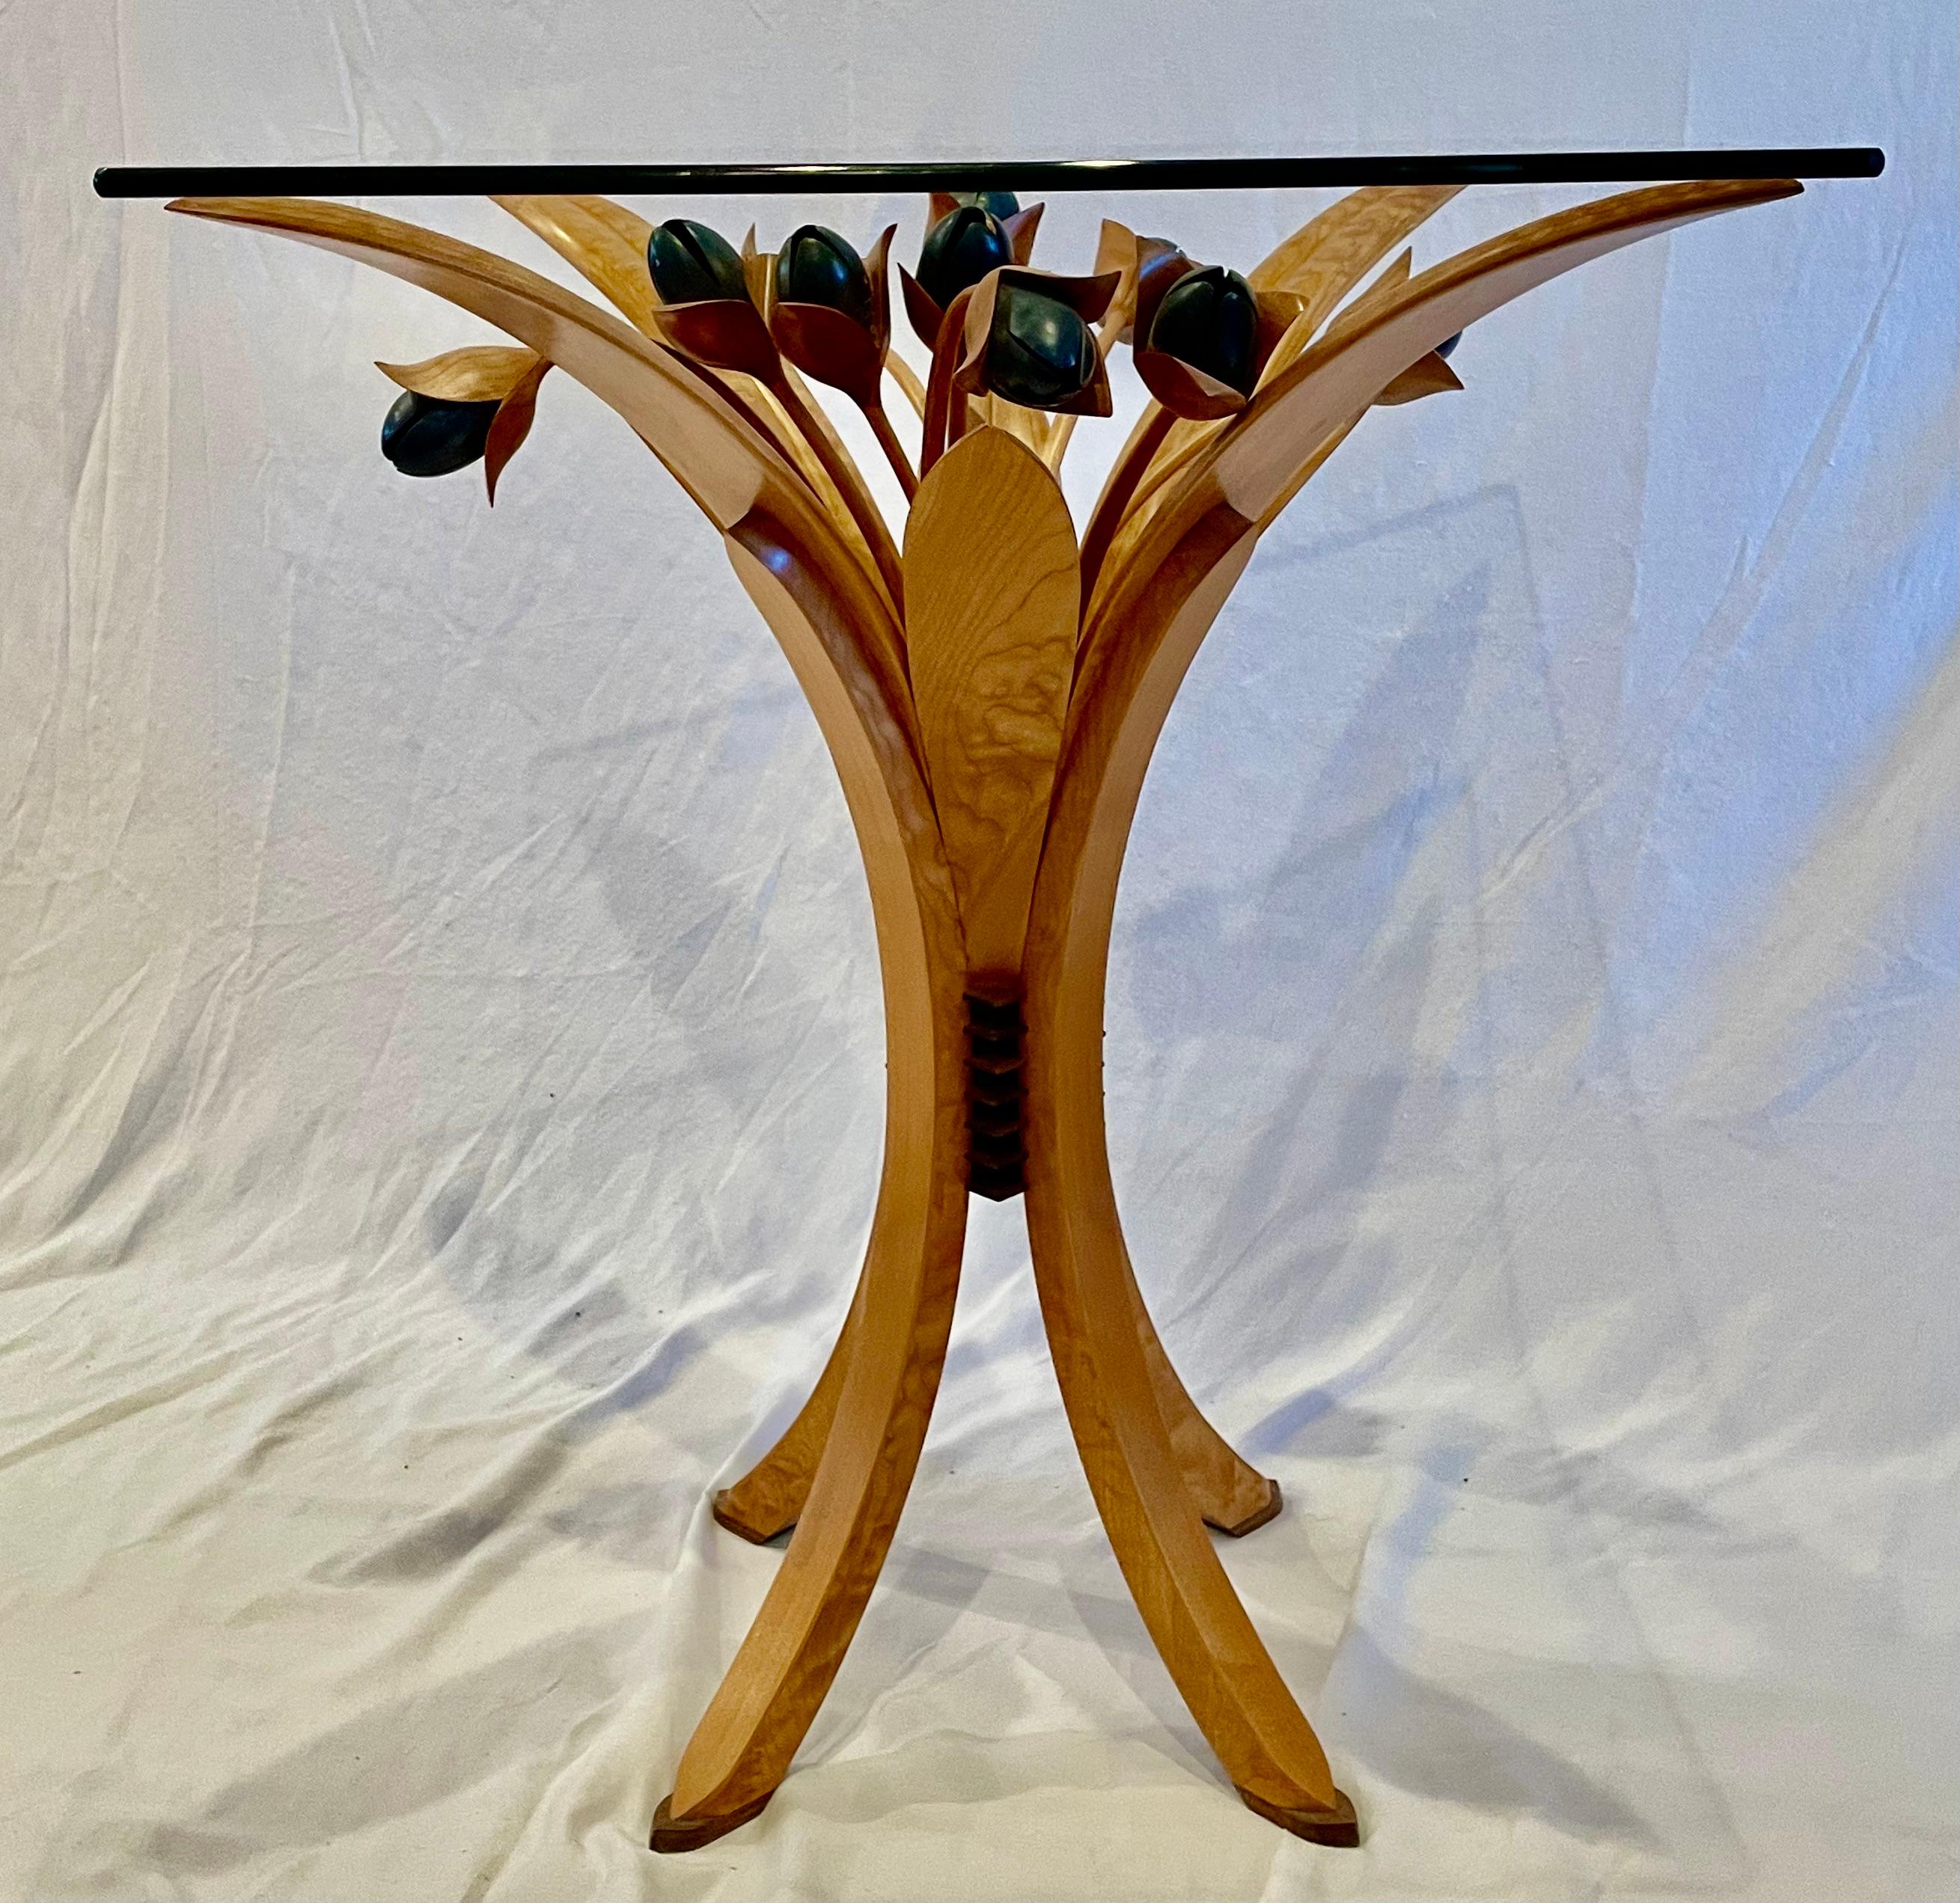 This unique bistro table is made with beautiful, quilted maple and deep teal tulips created with a translucent stain. There are wenge accents in the detailed base. The buyer adds their own 30